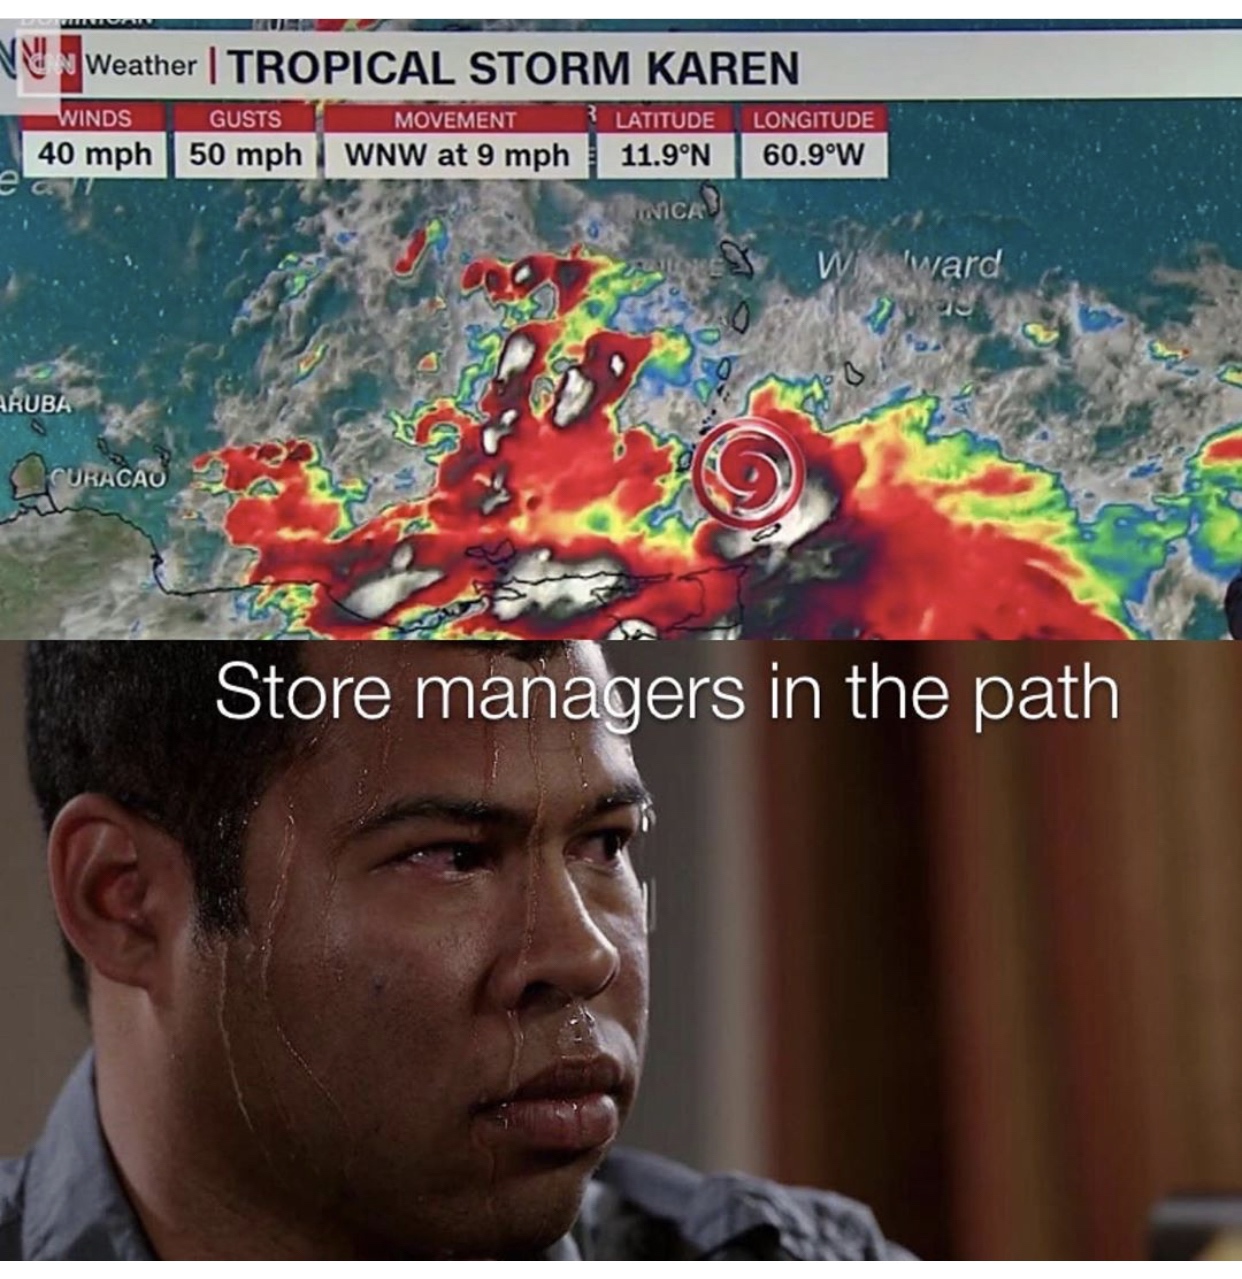 tropical storm karen meme - ve Weather | Tropical Storm Karen Winds Gusts M Ovement 3 Latitude Longitude 40 mph 50 mph Wnw at 9 mph 11.9N 60.9'W Cev Wward 2018 Kauba . Store managers in the path